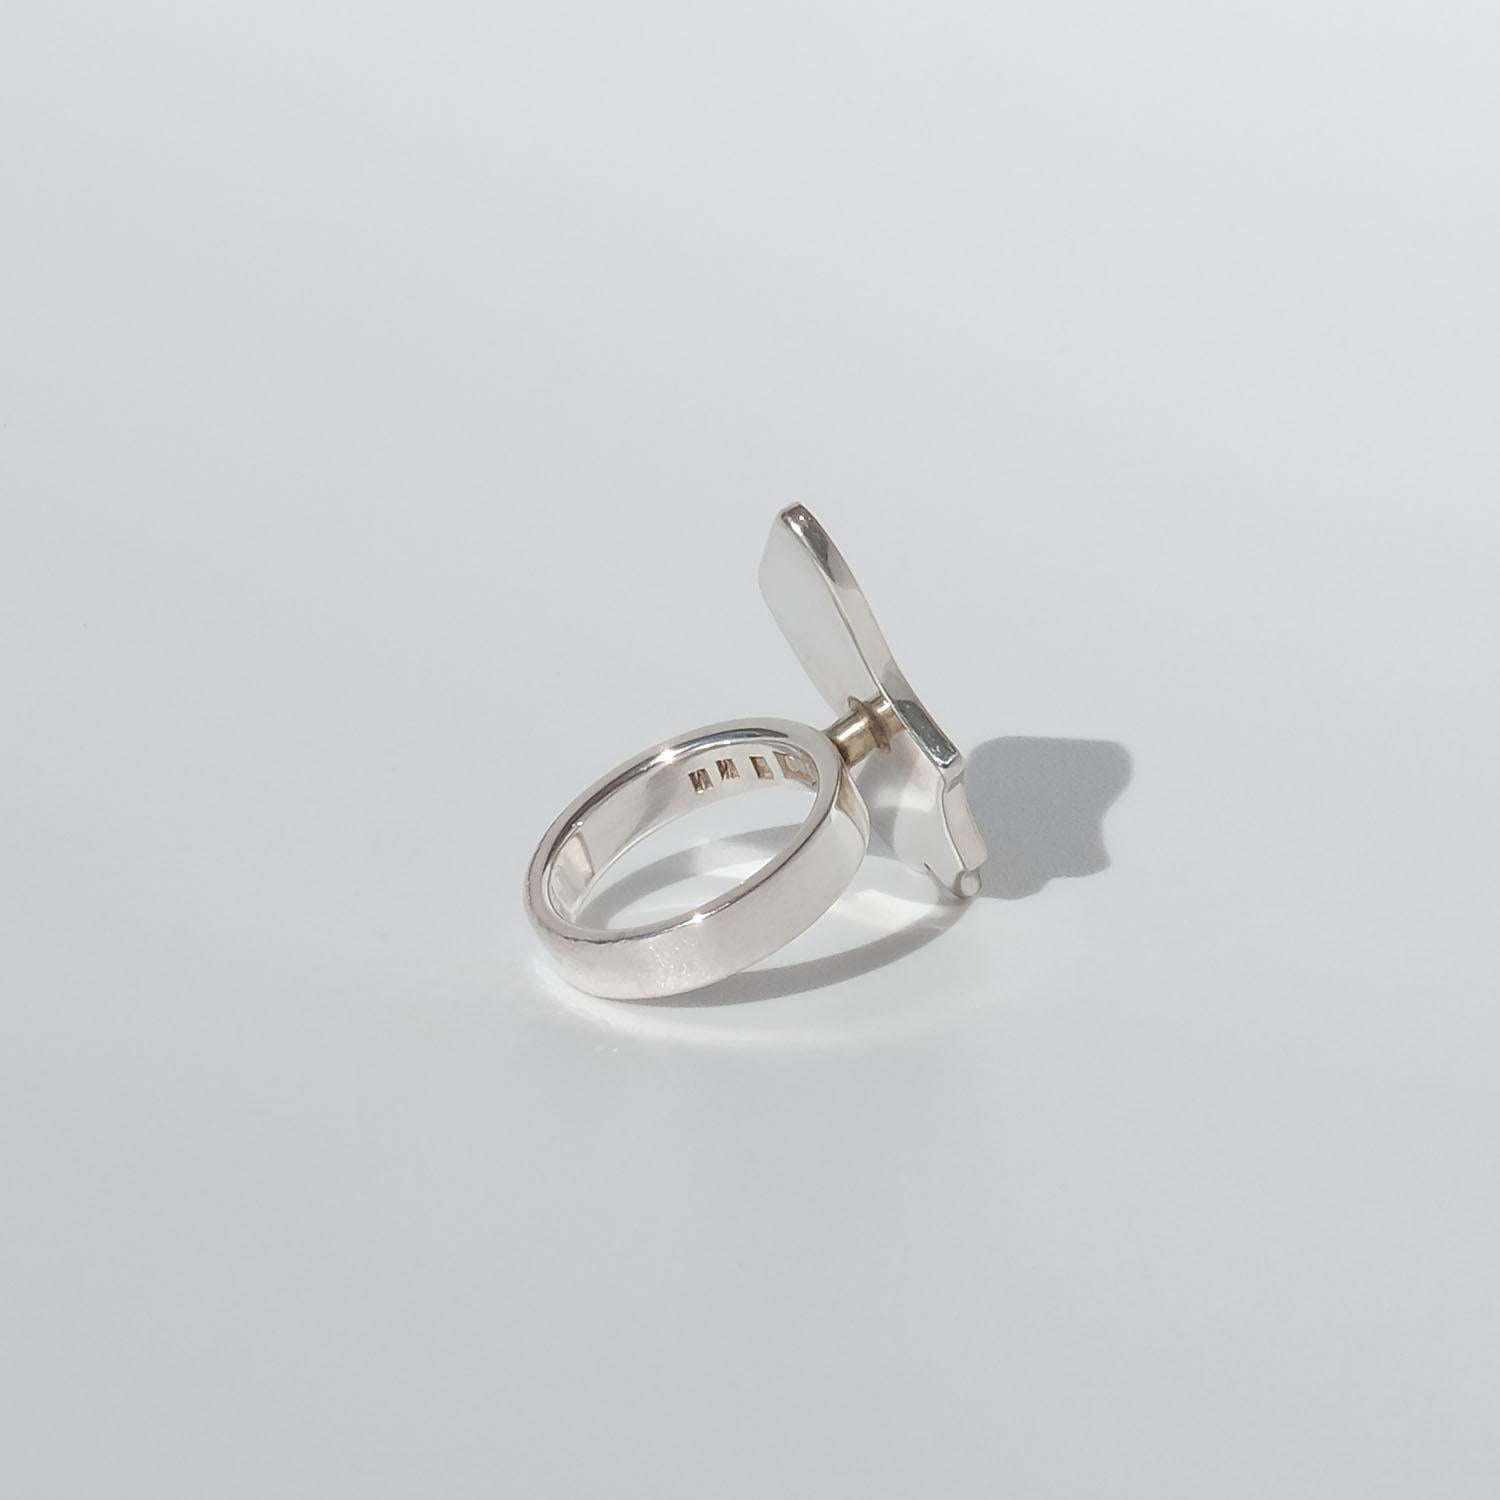 Asymmetrical Silver and Gold Ring by Swedish Master Sigurd Persson Year, 1978 For Sale 4